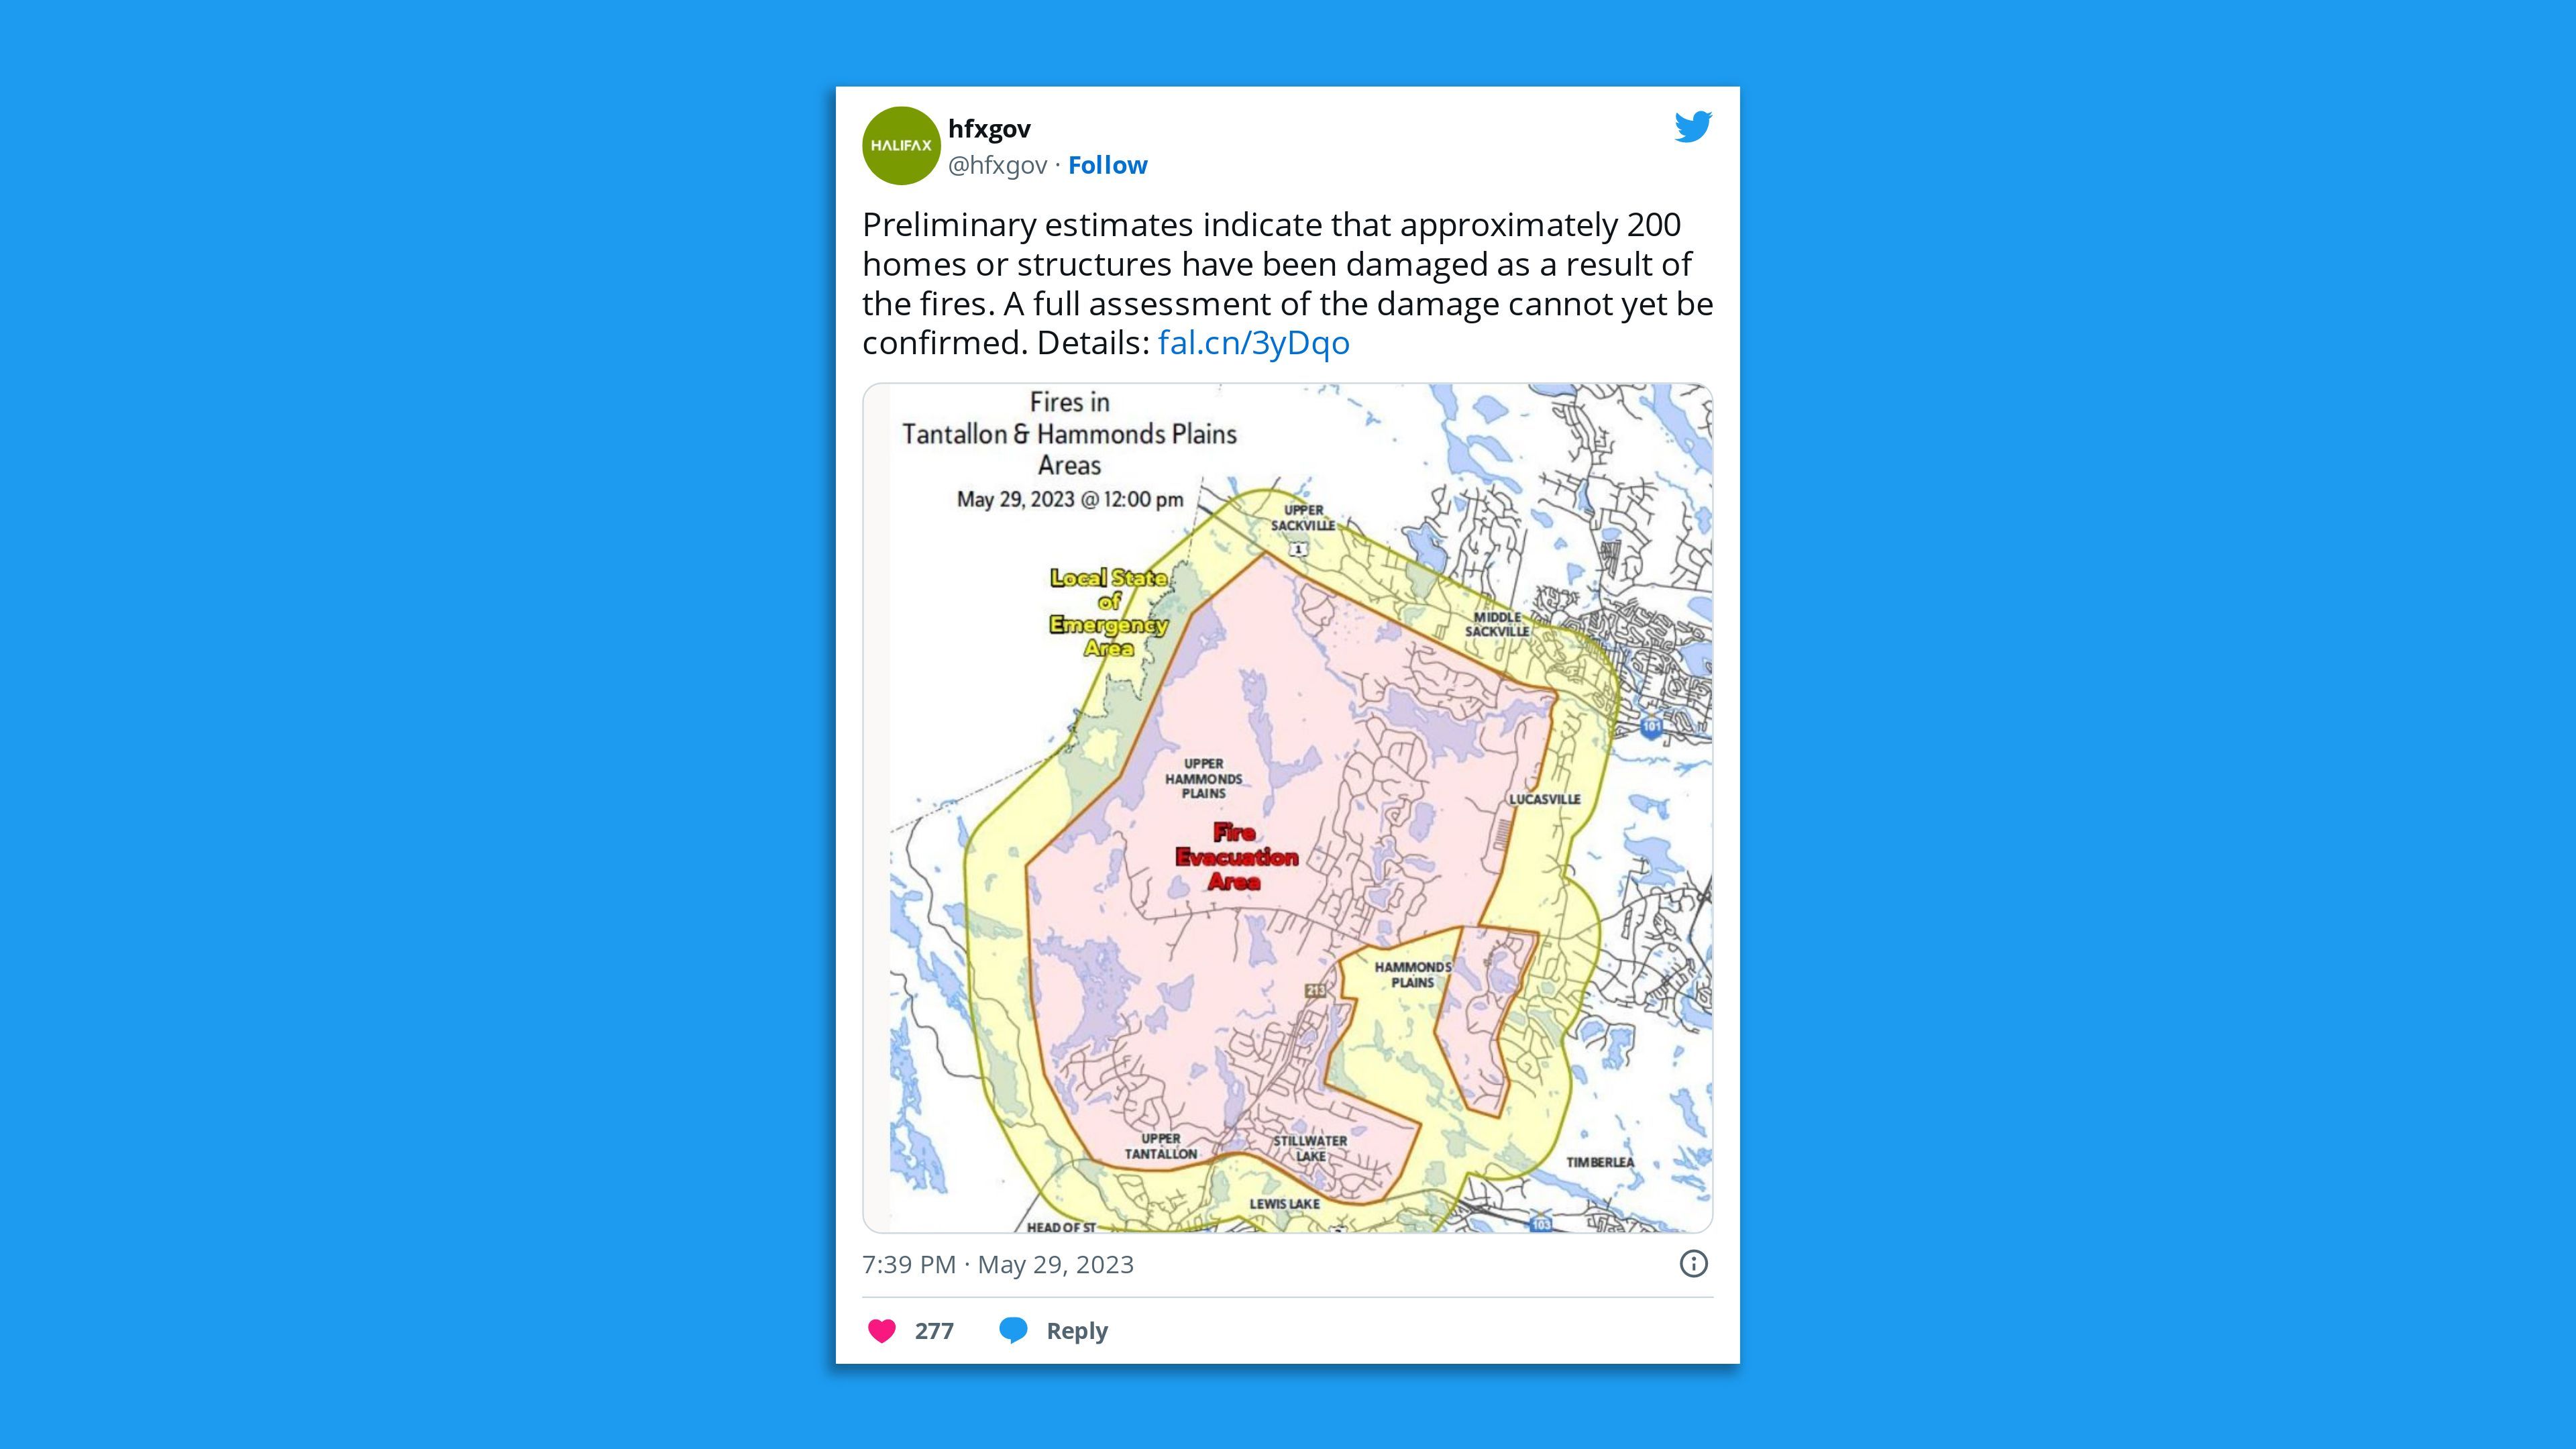 A screenshot of a tweet by Halifax Regional Municipality saying: "Preliminary estimates indicate that approximately 200 homes or structures have been damaged as a result of the fires."